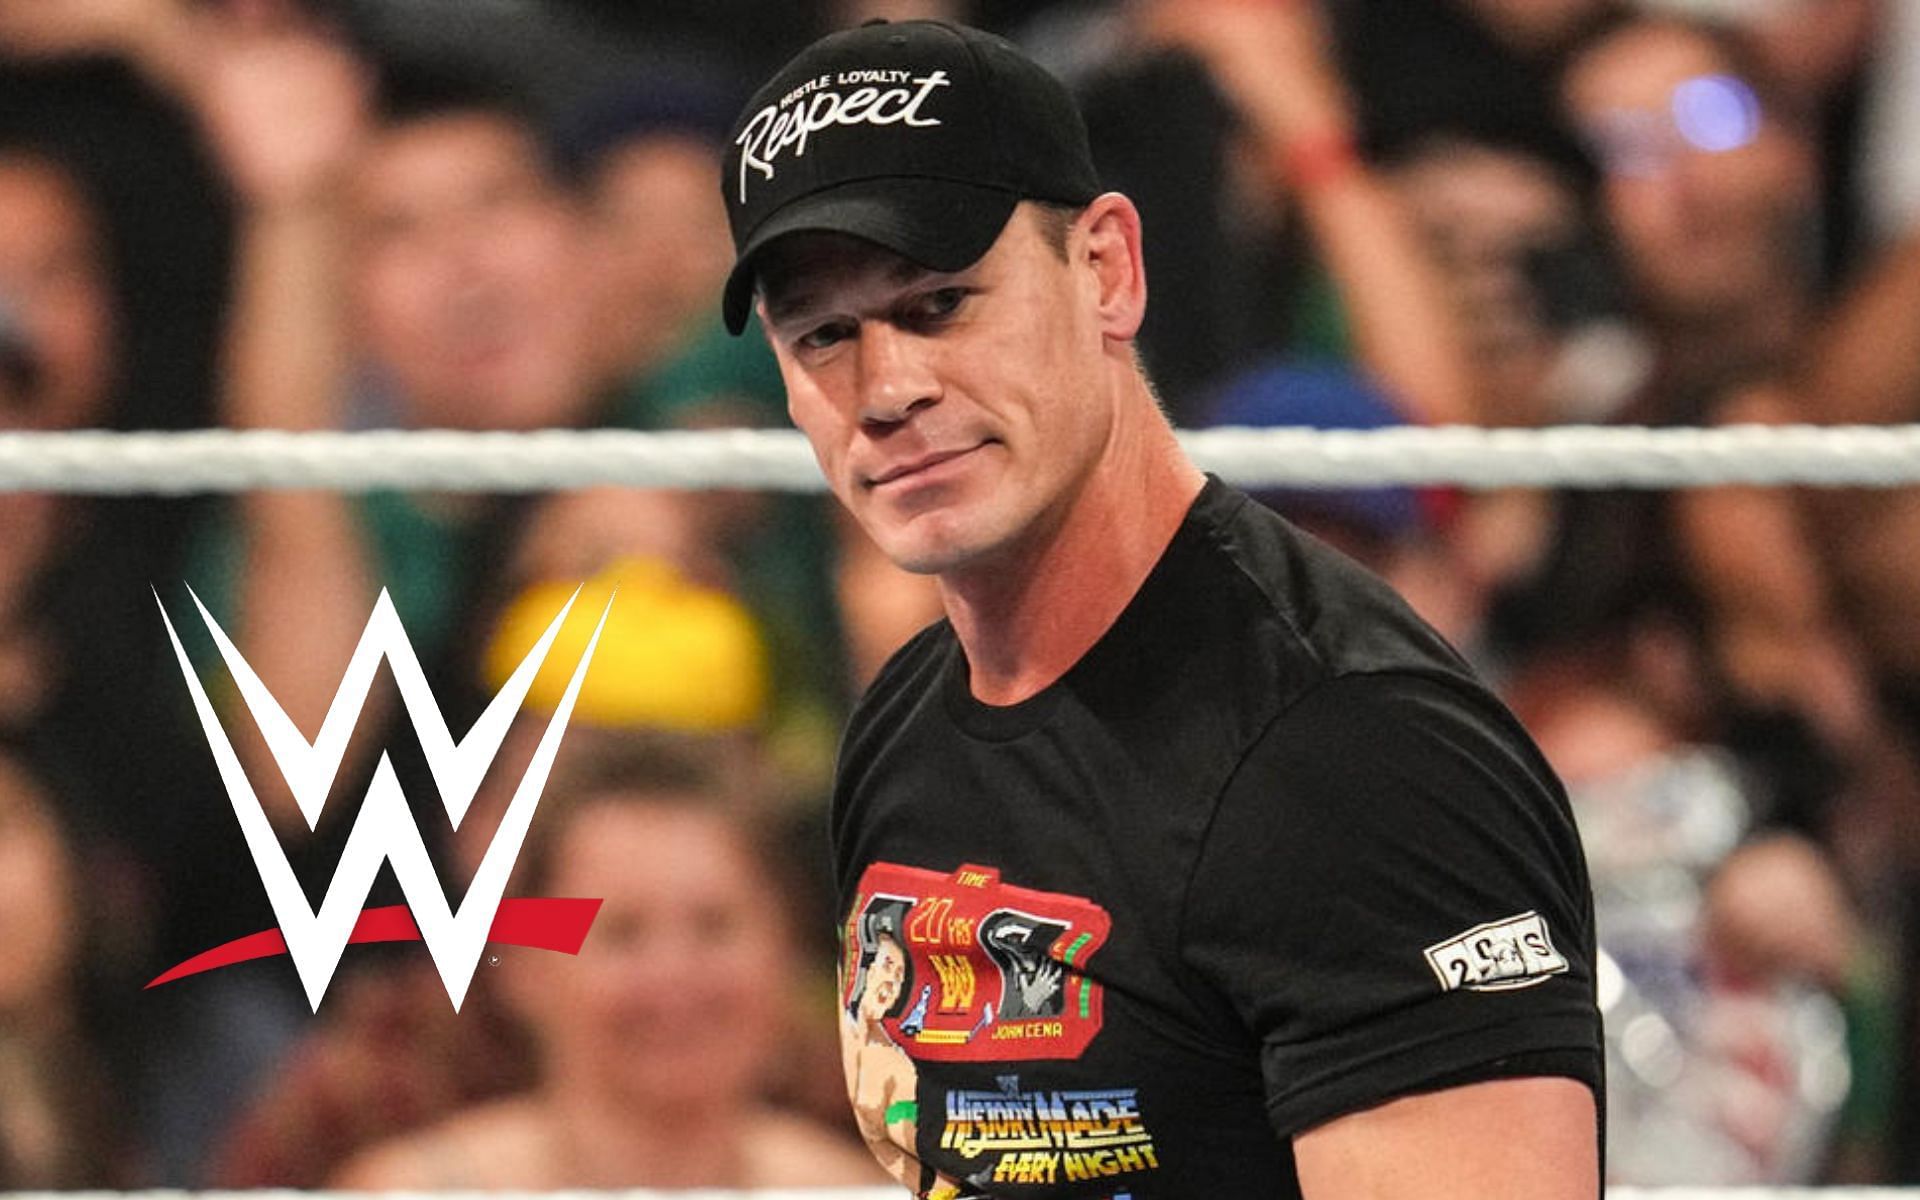 John Cena appeared on RAW for his two-decade WWE anniversary